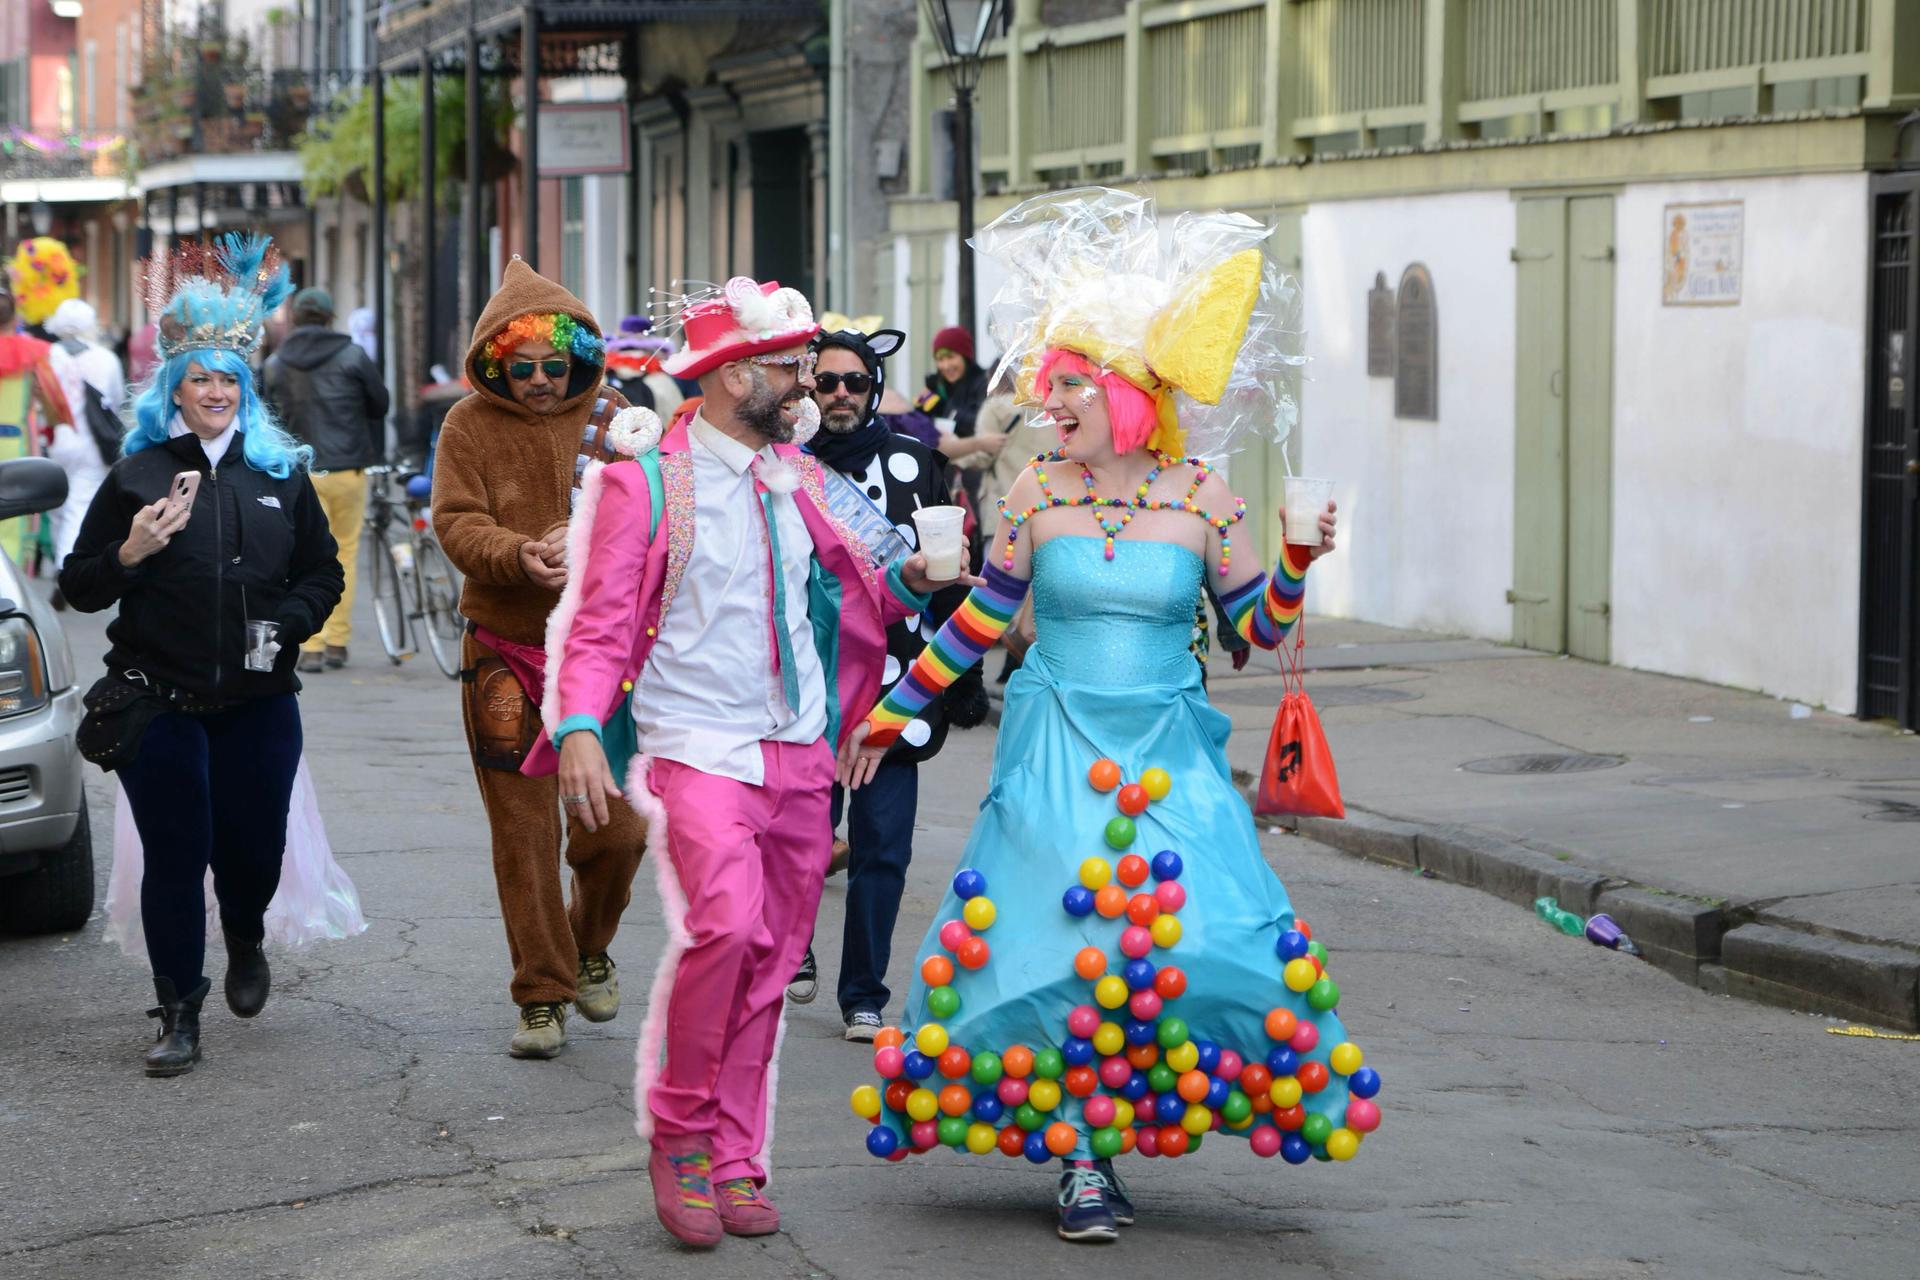  People in costume celebrate Mardi Gras on the streets of New Orleans. 